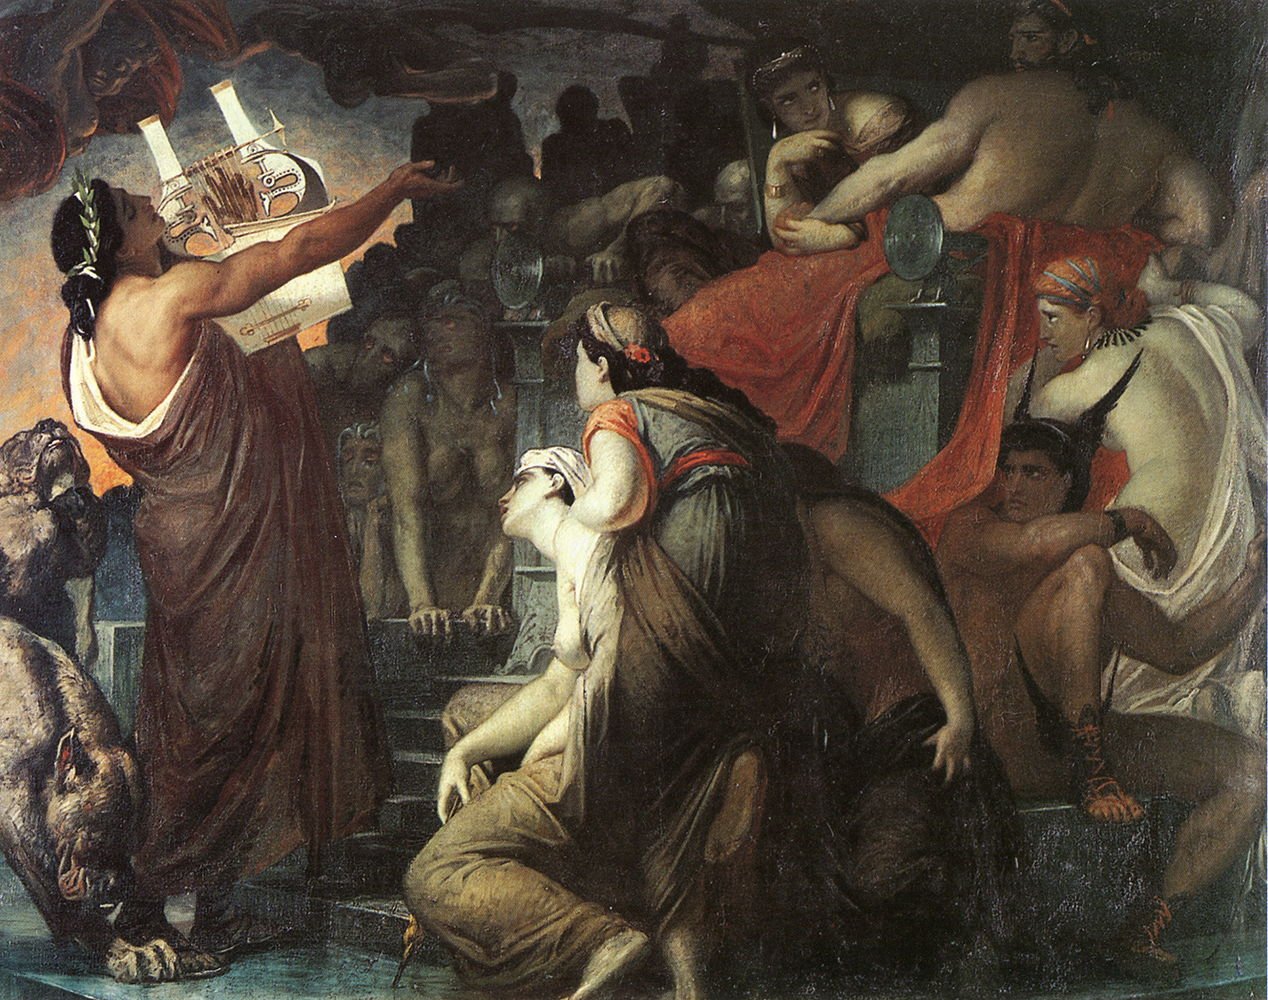 This painting represents Orpheus in the underworld.